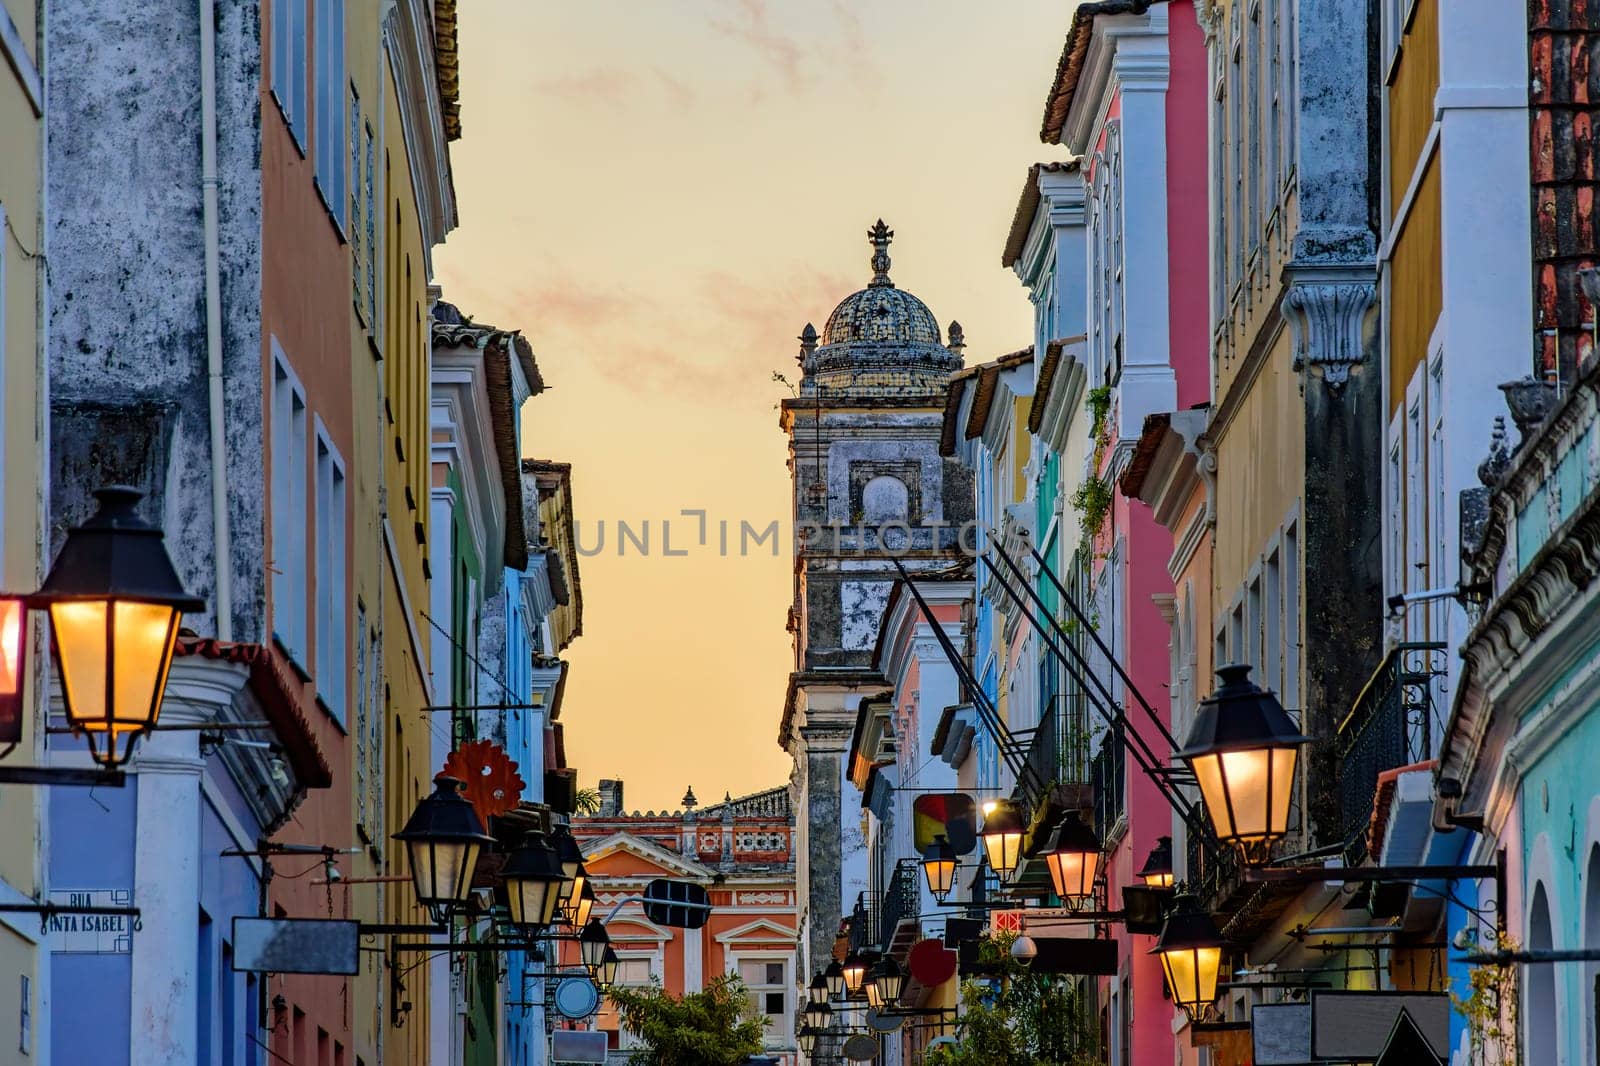 Street with historic houses with their facades and lanterns in the Pelourinho neighborhood in Salvador during sunset